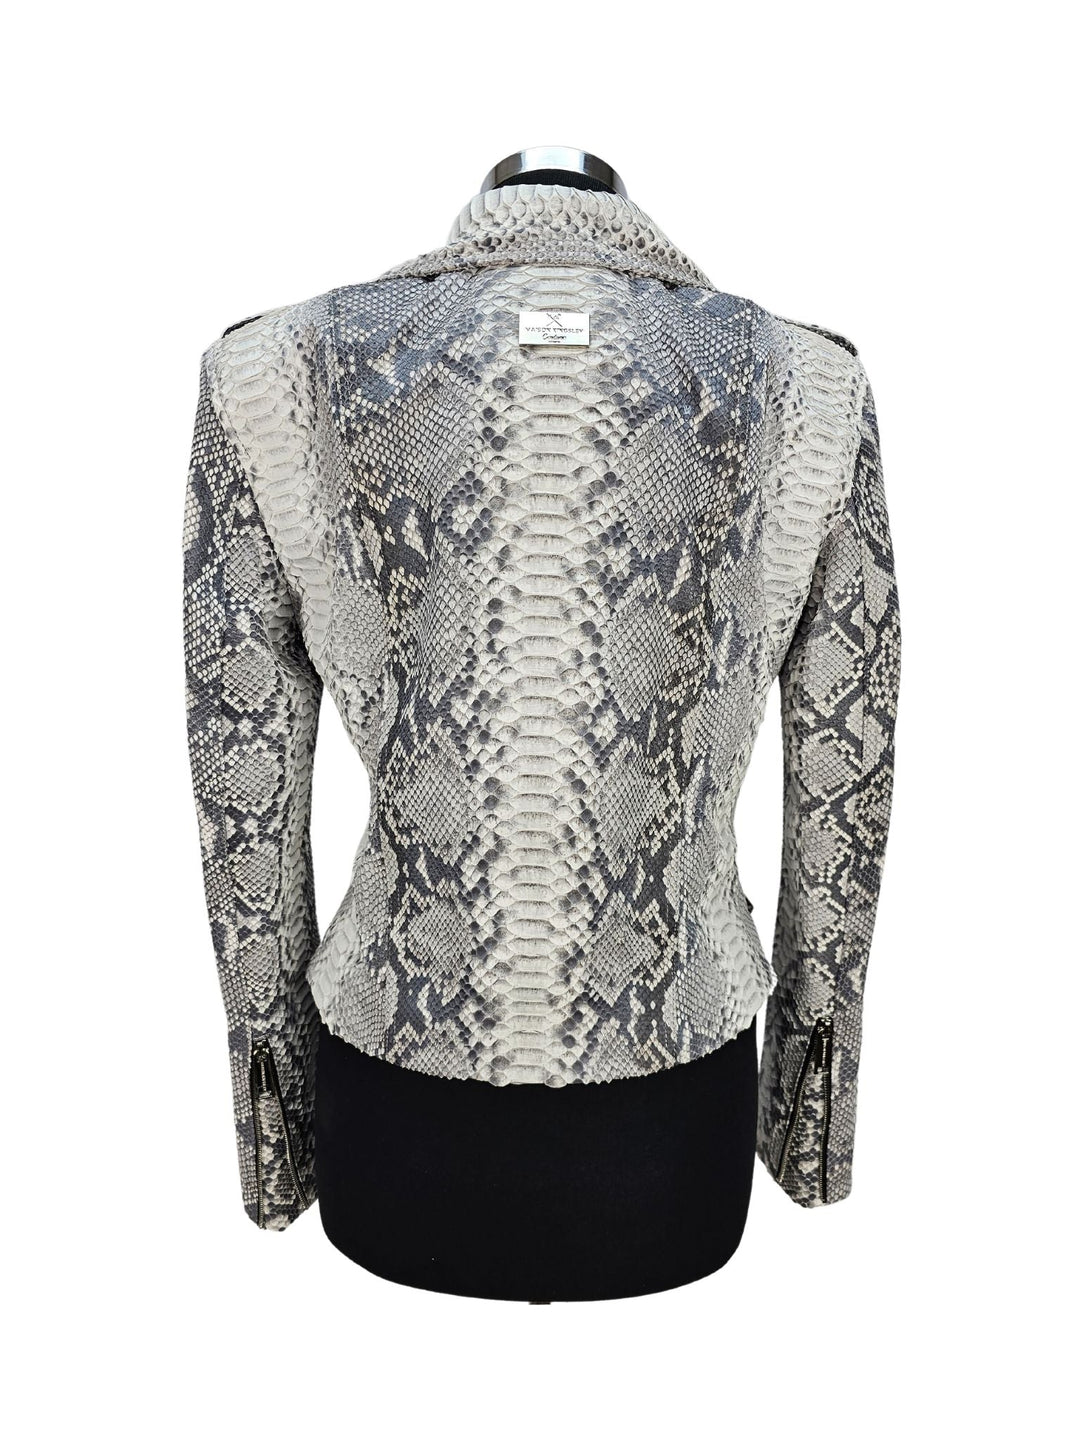 Women's Mejor White and Grey Python Jacket